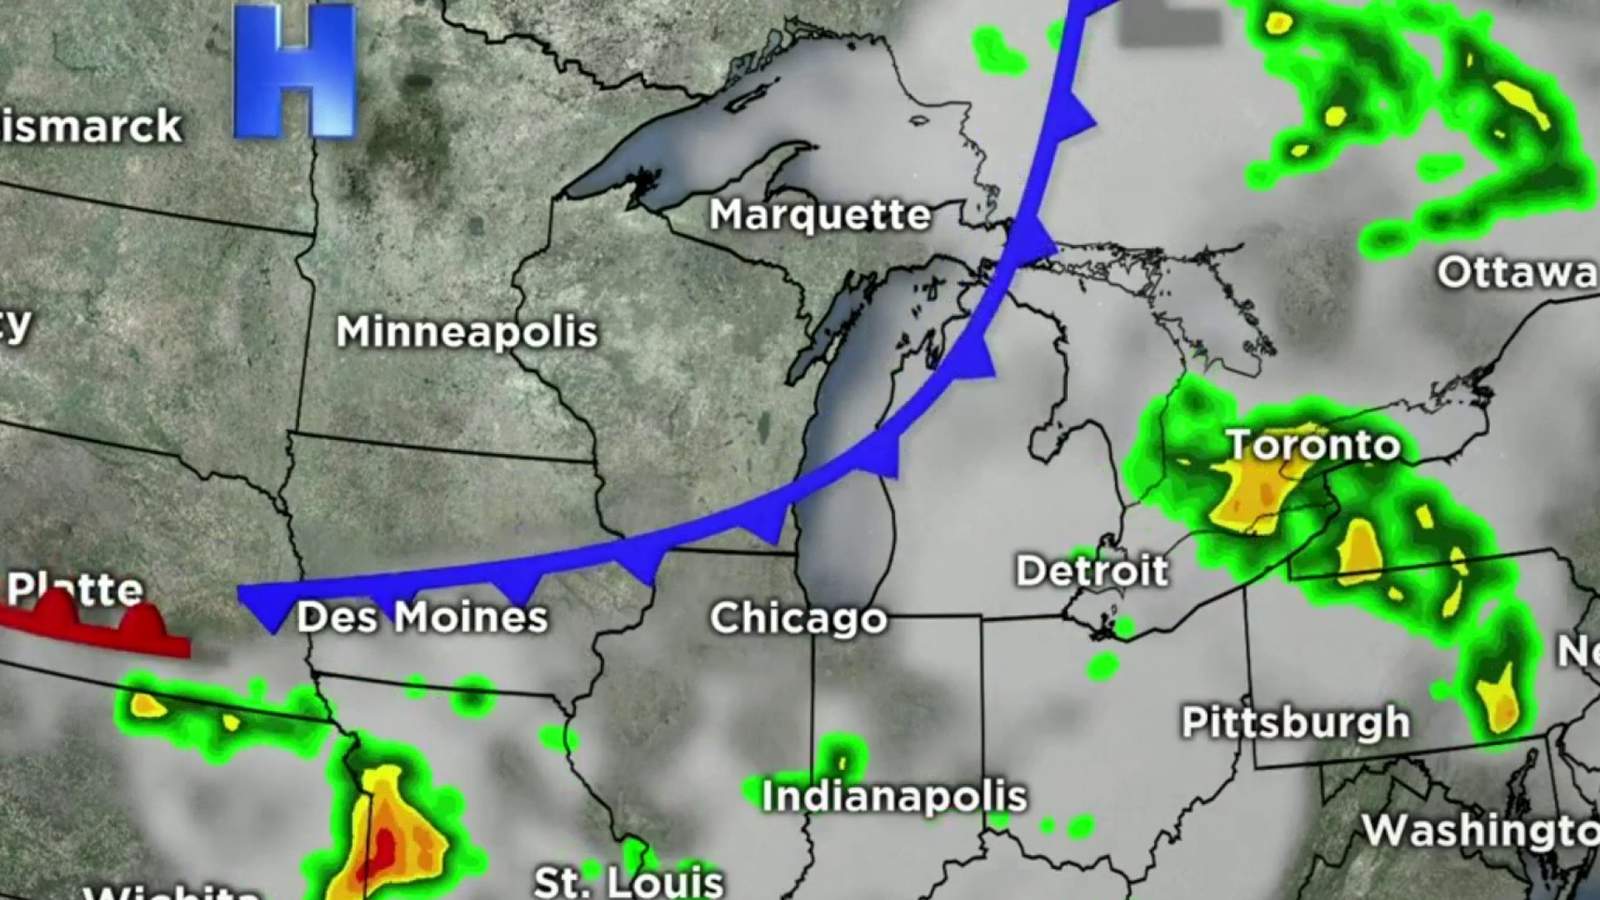 Metro Detroit weather: Stormy with risk of severe weather Friday evening